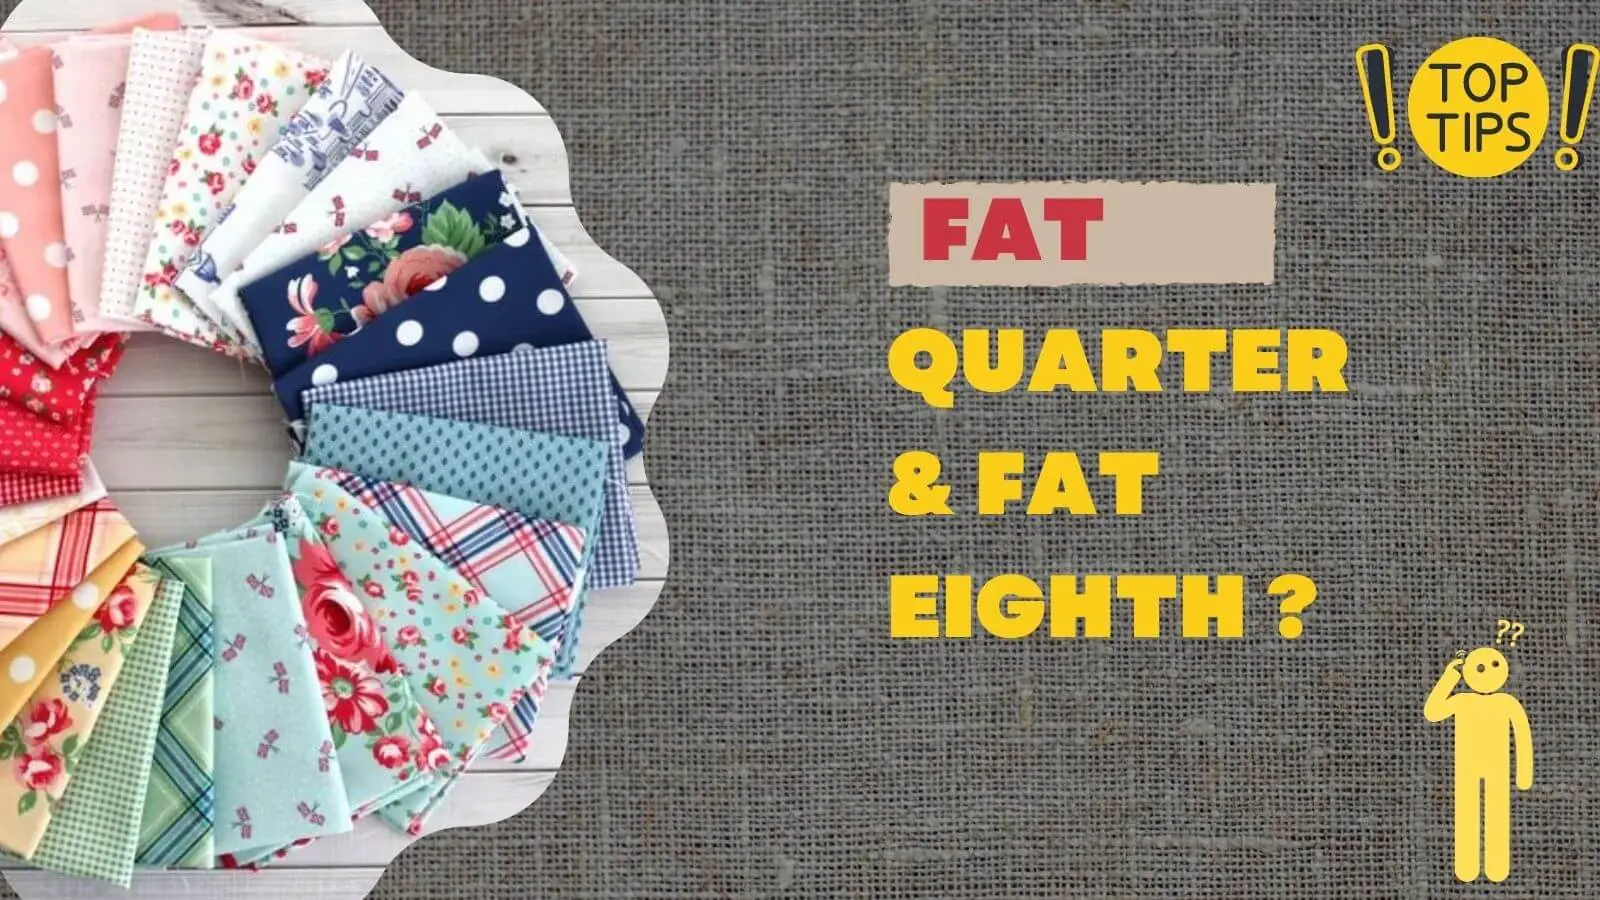 Definition of a Fat Quarter of Fabric and How It Is Cut